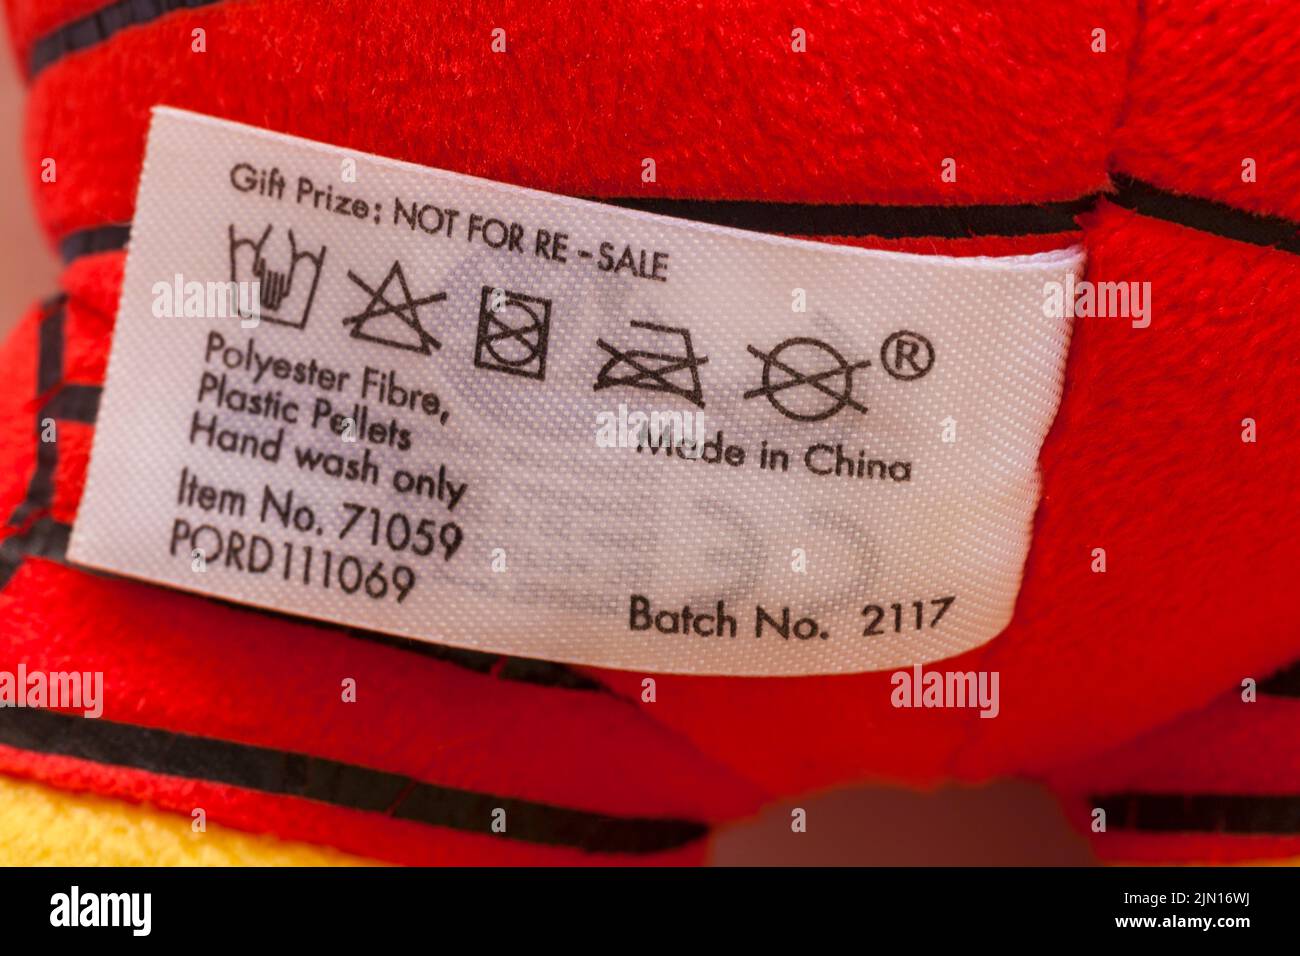 Made in China polyester fibre plastic pellets hand wash only label washing cleaning instructions on label in Marvel Iron Man soft plush toy Stock Photo